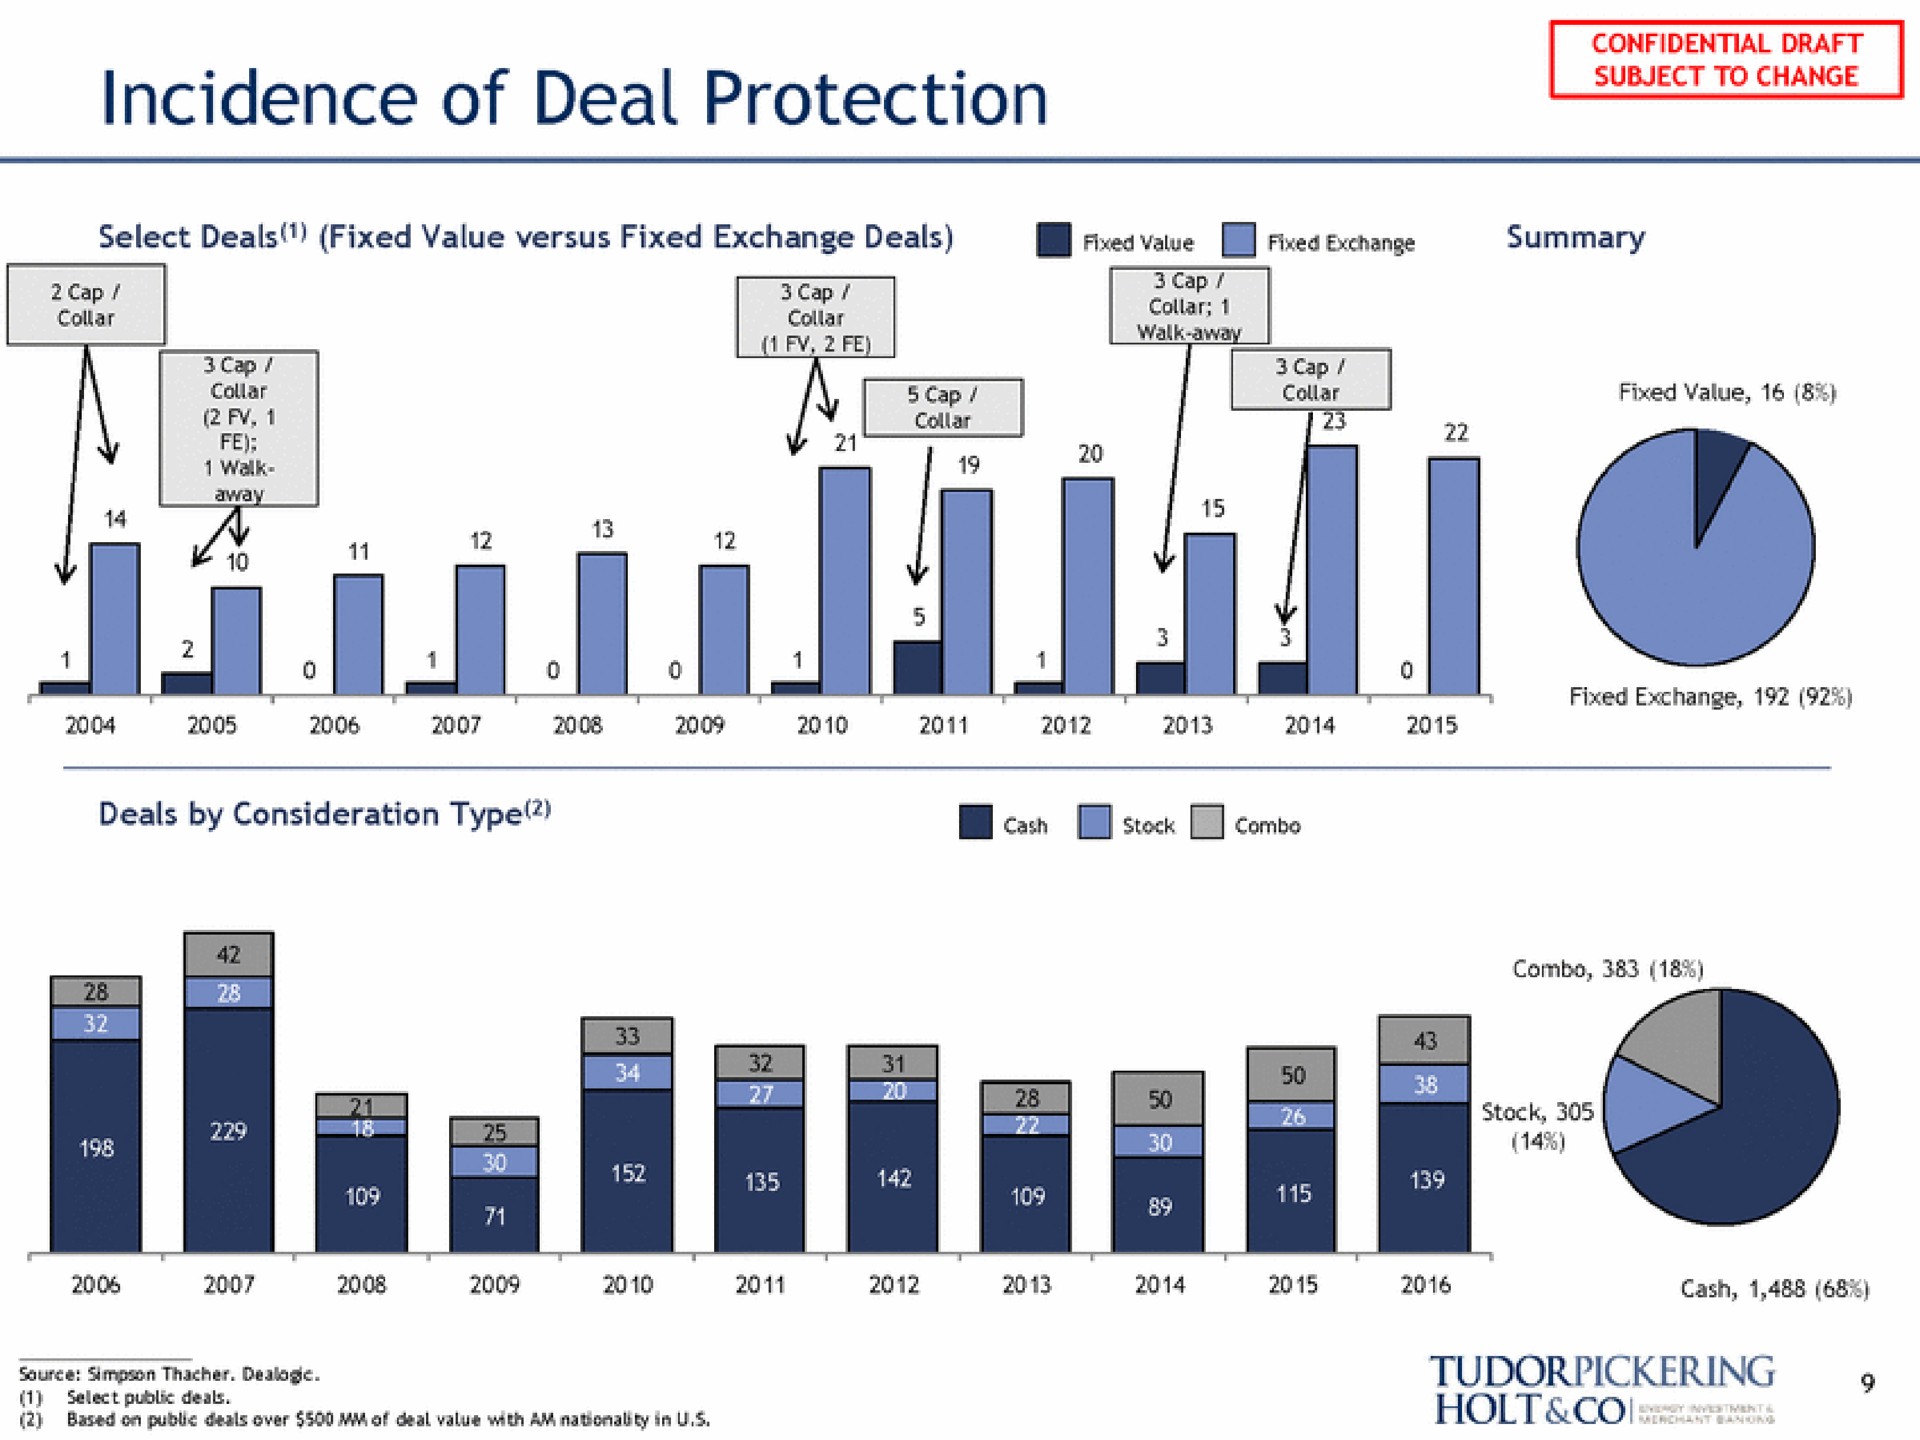 incidence of deal protection source ring | Tudor, Pickering, Holt & Co